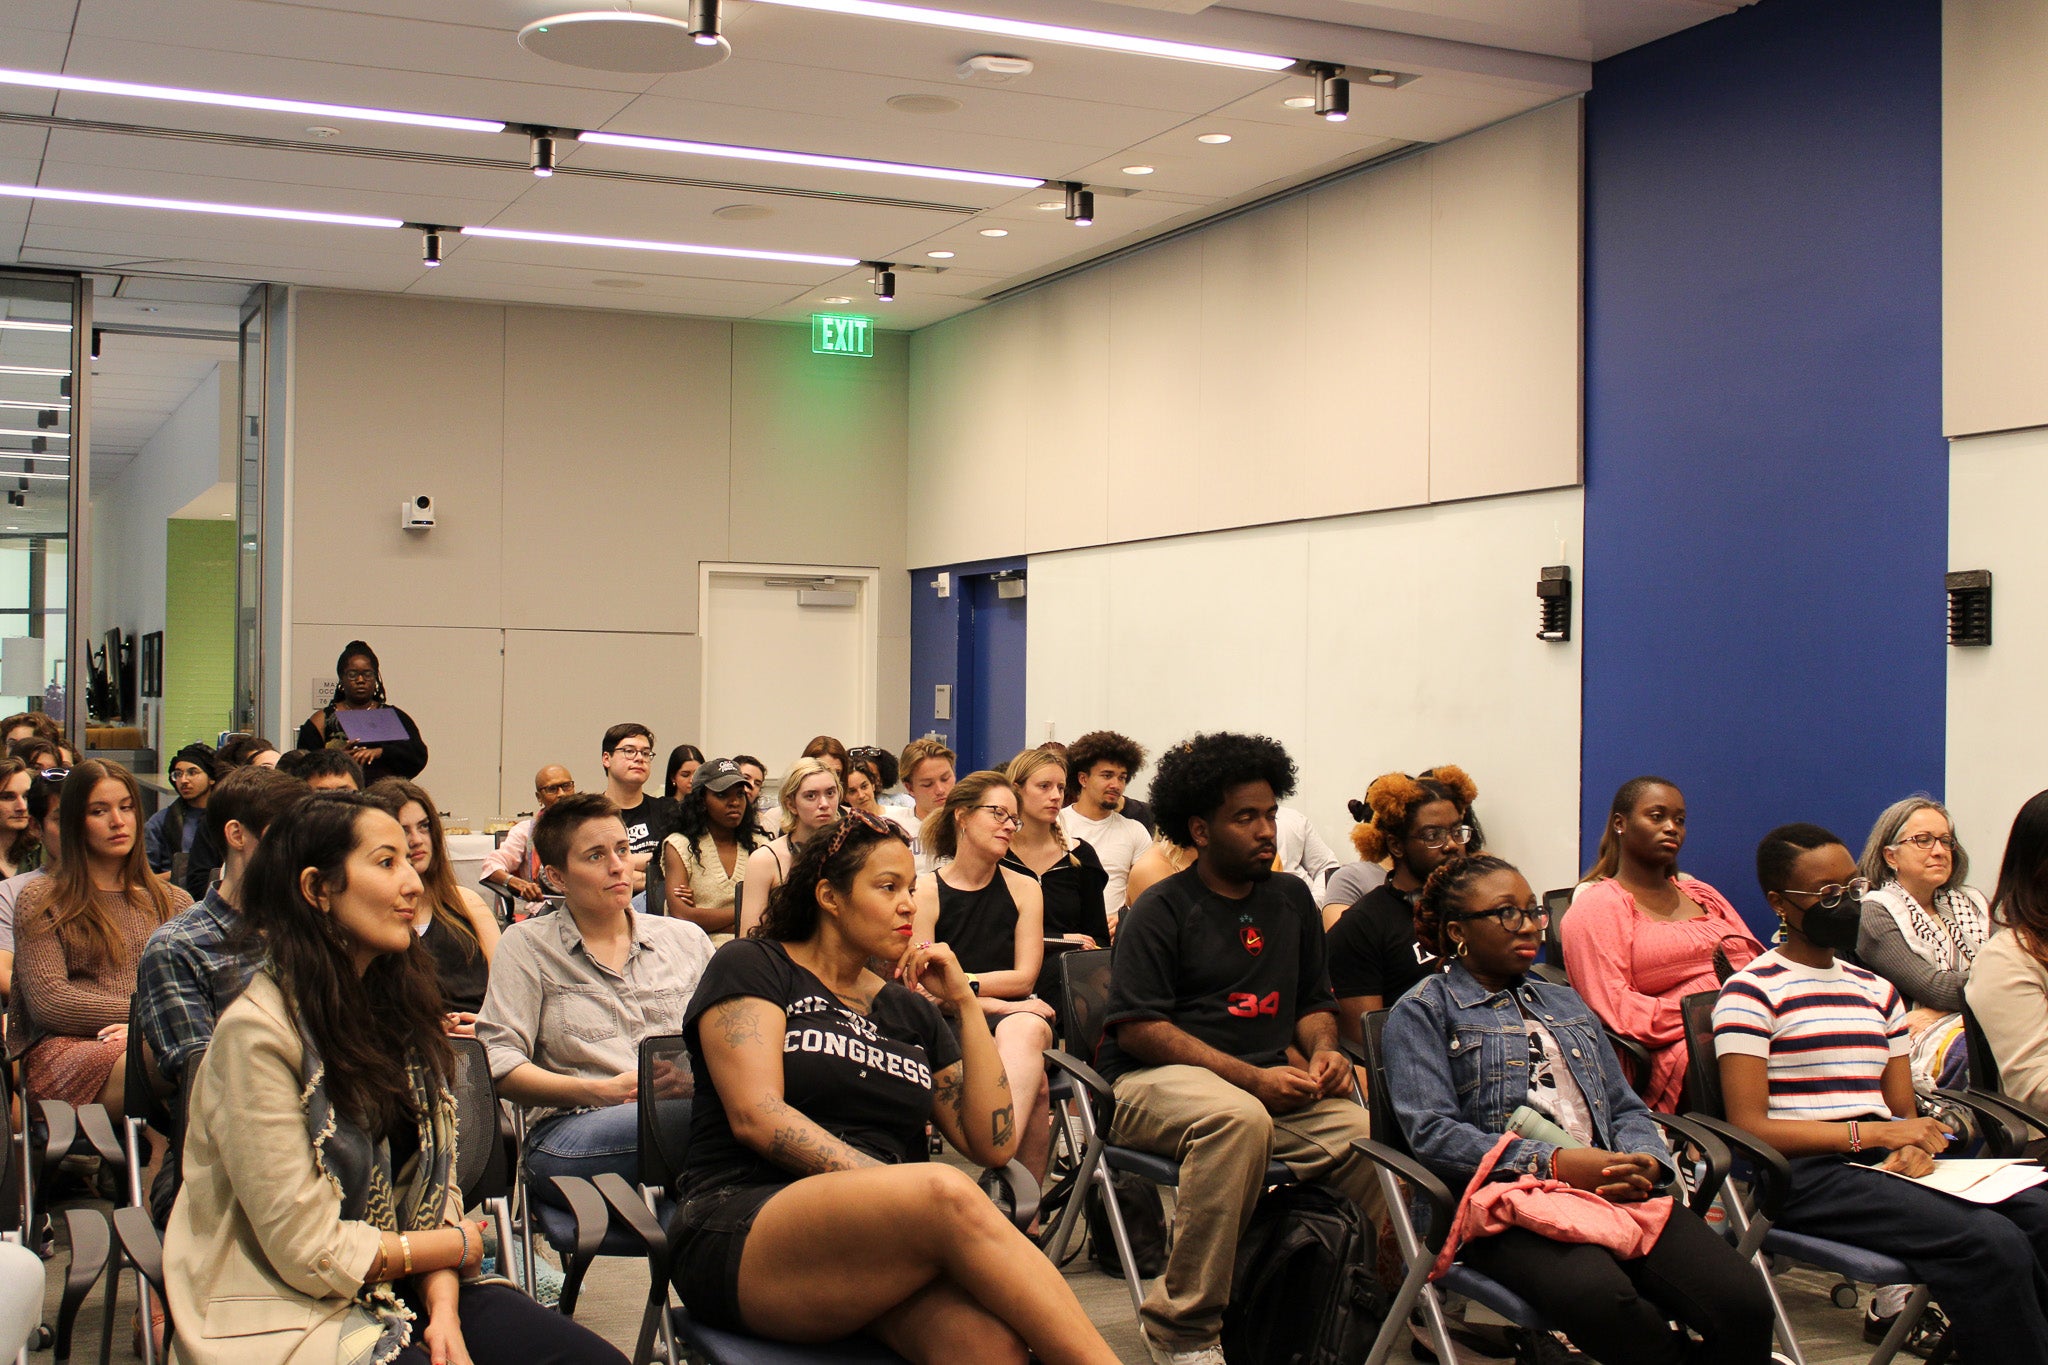 An audience full of racially and gender diverse people attentively listen to Dr. McFadden's lecture.